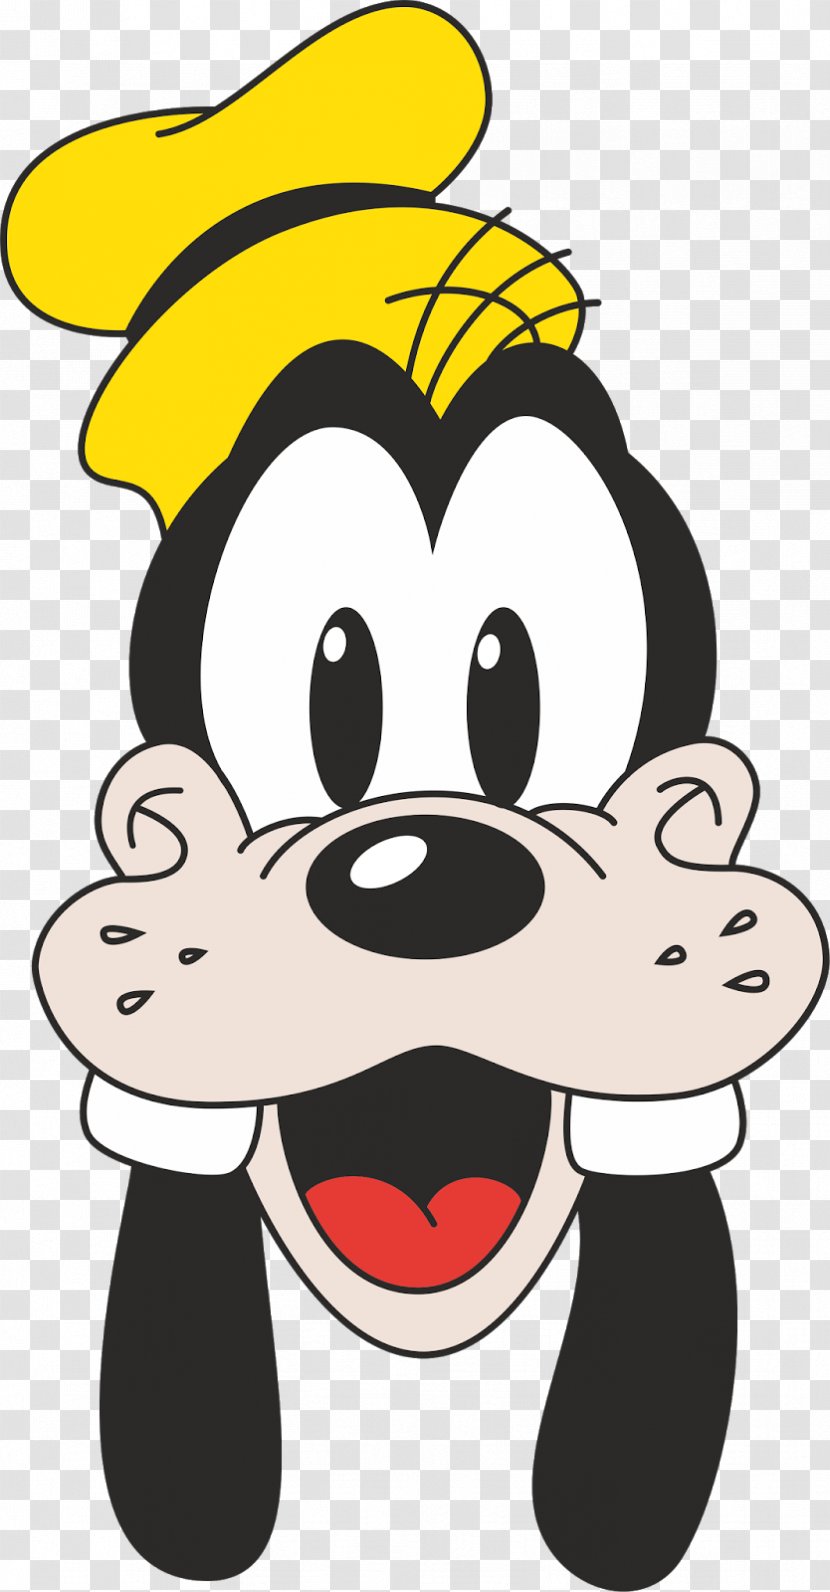 Goofy Minnie Mouse Mickey Donald Duck Pluto - Animated Cartoon - Cdr Transparent PNG